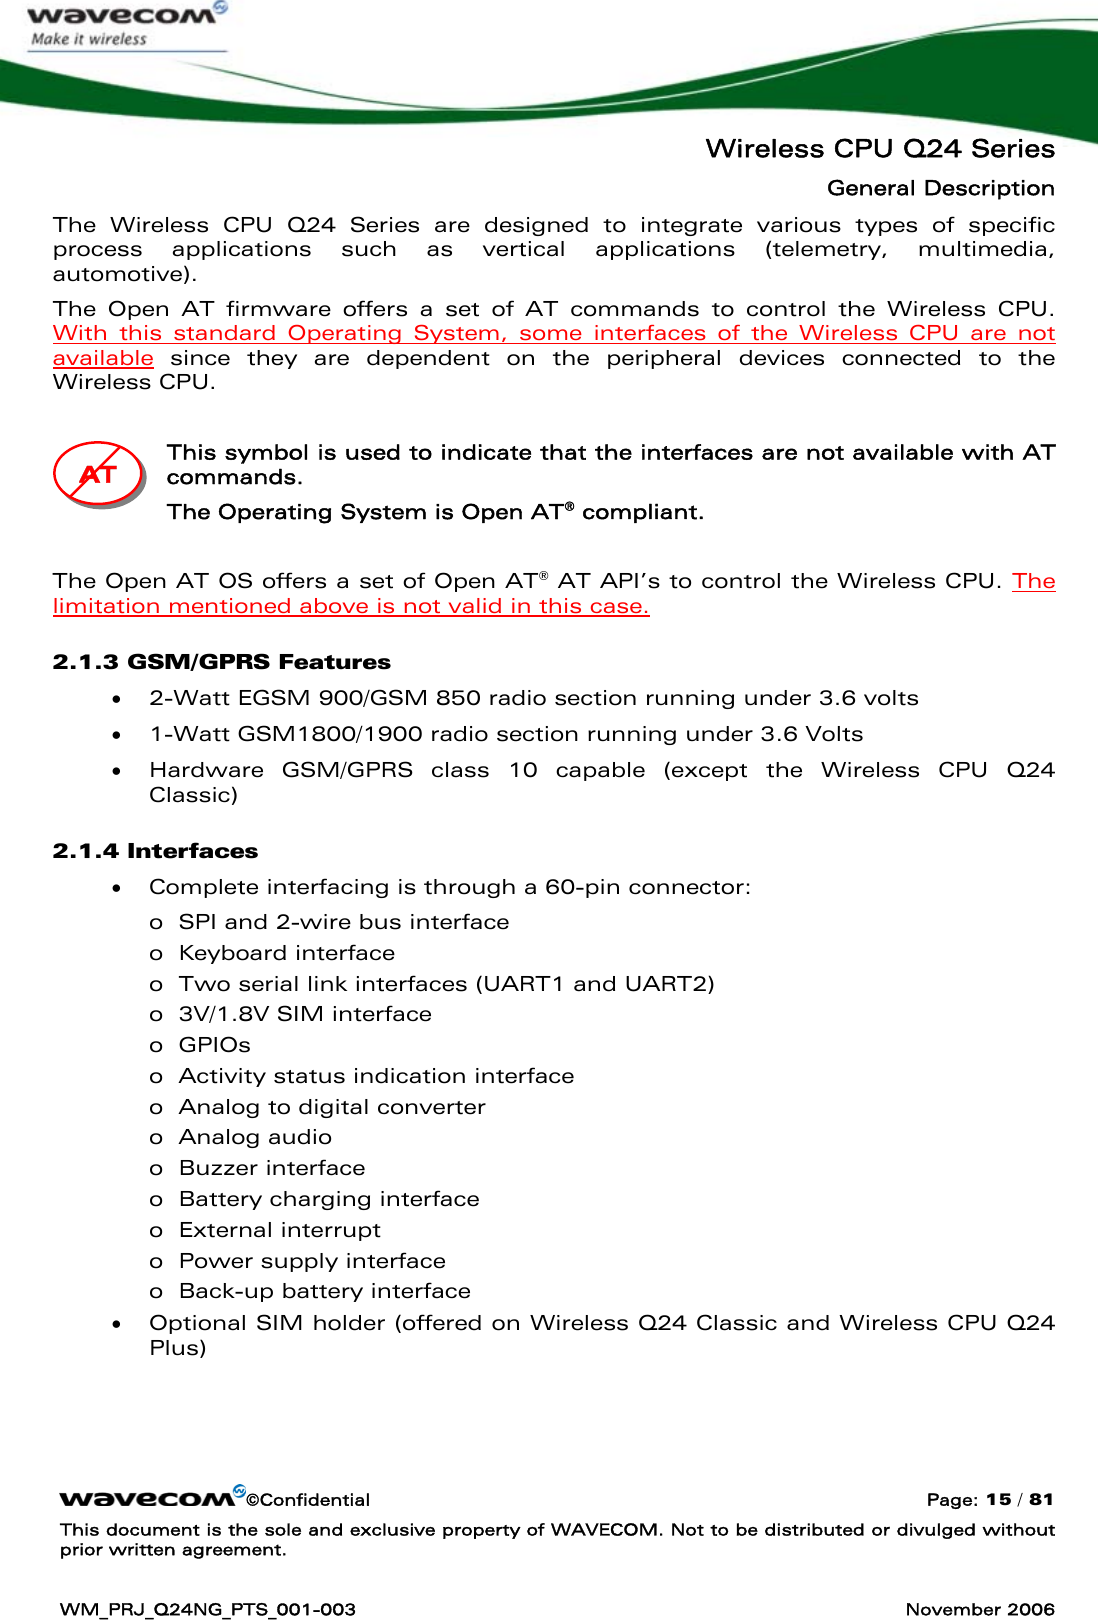   Wireless CPU Q24 Series General Description ©Confidential  Page: 15 / 81 This document is the sole and exclusive property of WAVECOM. Not to be distributed or divulged without prior written agreement.  WM_PRJ_Q24NG_PTS_001-003  November 2006  The Wireless CPU Q24 Series are designed to integrate various types of specific process applications such as vertical applications (telemetry, multimedia, automotive).  The Open AT firmware offers a set of AT commands to control the Wireless CPU. With this standard Operating System, some interfaces of the Wireless CPU are not available since they are dependent on the peripheral devices connected to the Wireless CPU.   This symbol is used to indicate that the interfaces are not available with AT commands. The Operating System is Open AT® compliant.  The Open AT OS offers a set of Open AT® AT API’s to control the Wireless CPU. The limitation mentioned above is not valid in this case. 2.1.3 GSM/GPRS Features • 2-Watt EGSM 900/GSM 850 radio section running under 3.6 volts • 1-Watt GSM1800/1900 radio section running under 3.6 Volts • Hardware GSM/GPRS class 10 capable (except the Wireless CPU Q24 Classic) 2.1.4 Interfaces • Complete interfacing is through a 60-pin connector: o SPI and 2-wire bus interface o Keyboard interface o Two serial link interfaces (UART1 and UART2) o 3V/1.8V SIM interface o GPIOs o Activity status indication interface o Analog to digital converter o Analog audio o Buzzer interface o Battery charging interface o External interrupt o Power supply interface o Back-up battery interface • Optional SIM holder (offered on Wireless Q24 Classic and Wireless CPU Q24 Plus)   AAATTT   